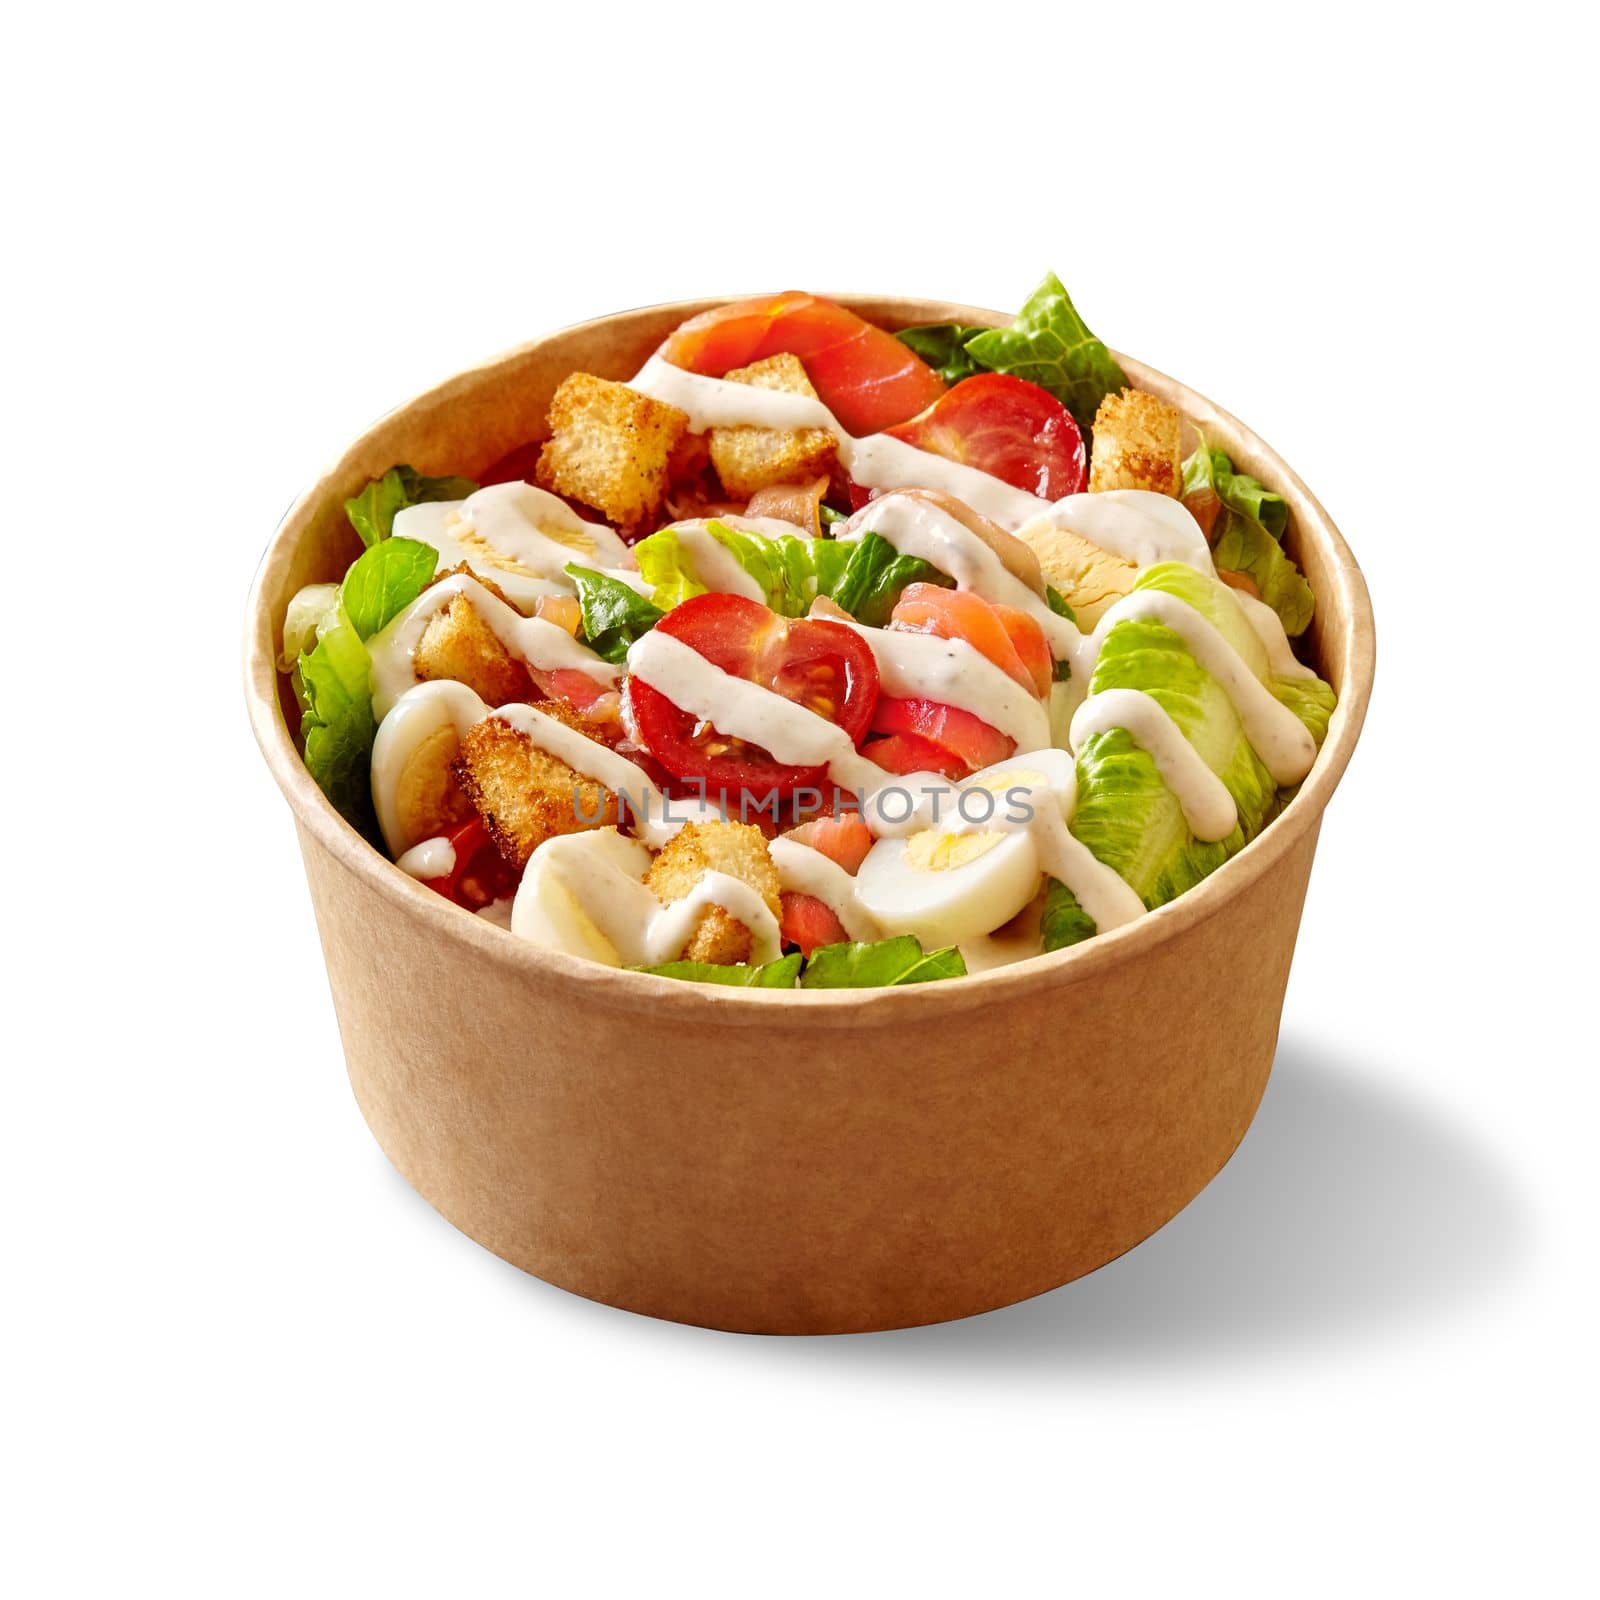 Tasty Caesar salad with green lettuce, cherry tomatoes, quail eggs, crispy croutons, parmesan and smoked salmon dressed with delicate sauce served in cardboard bowl on white. Healthy takeaway snack